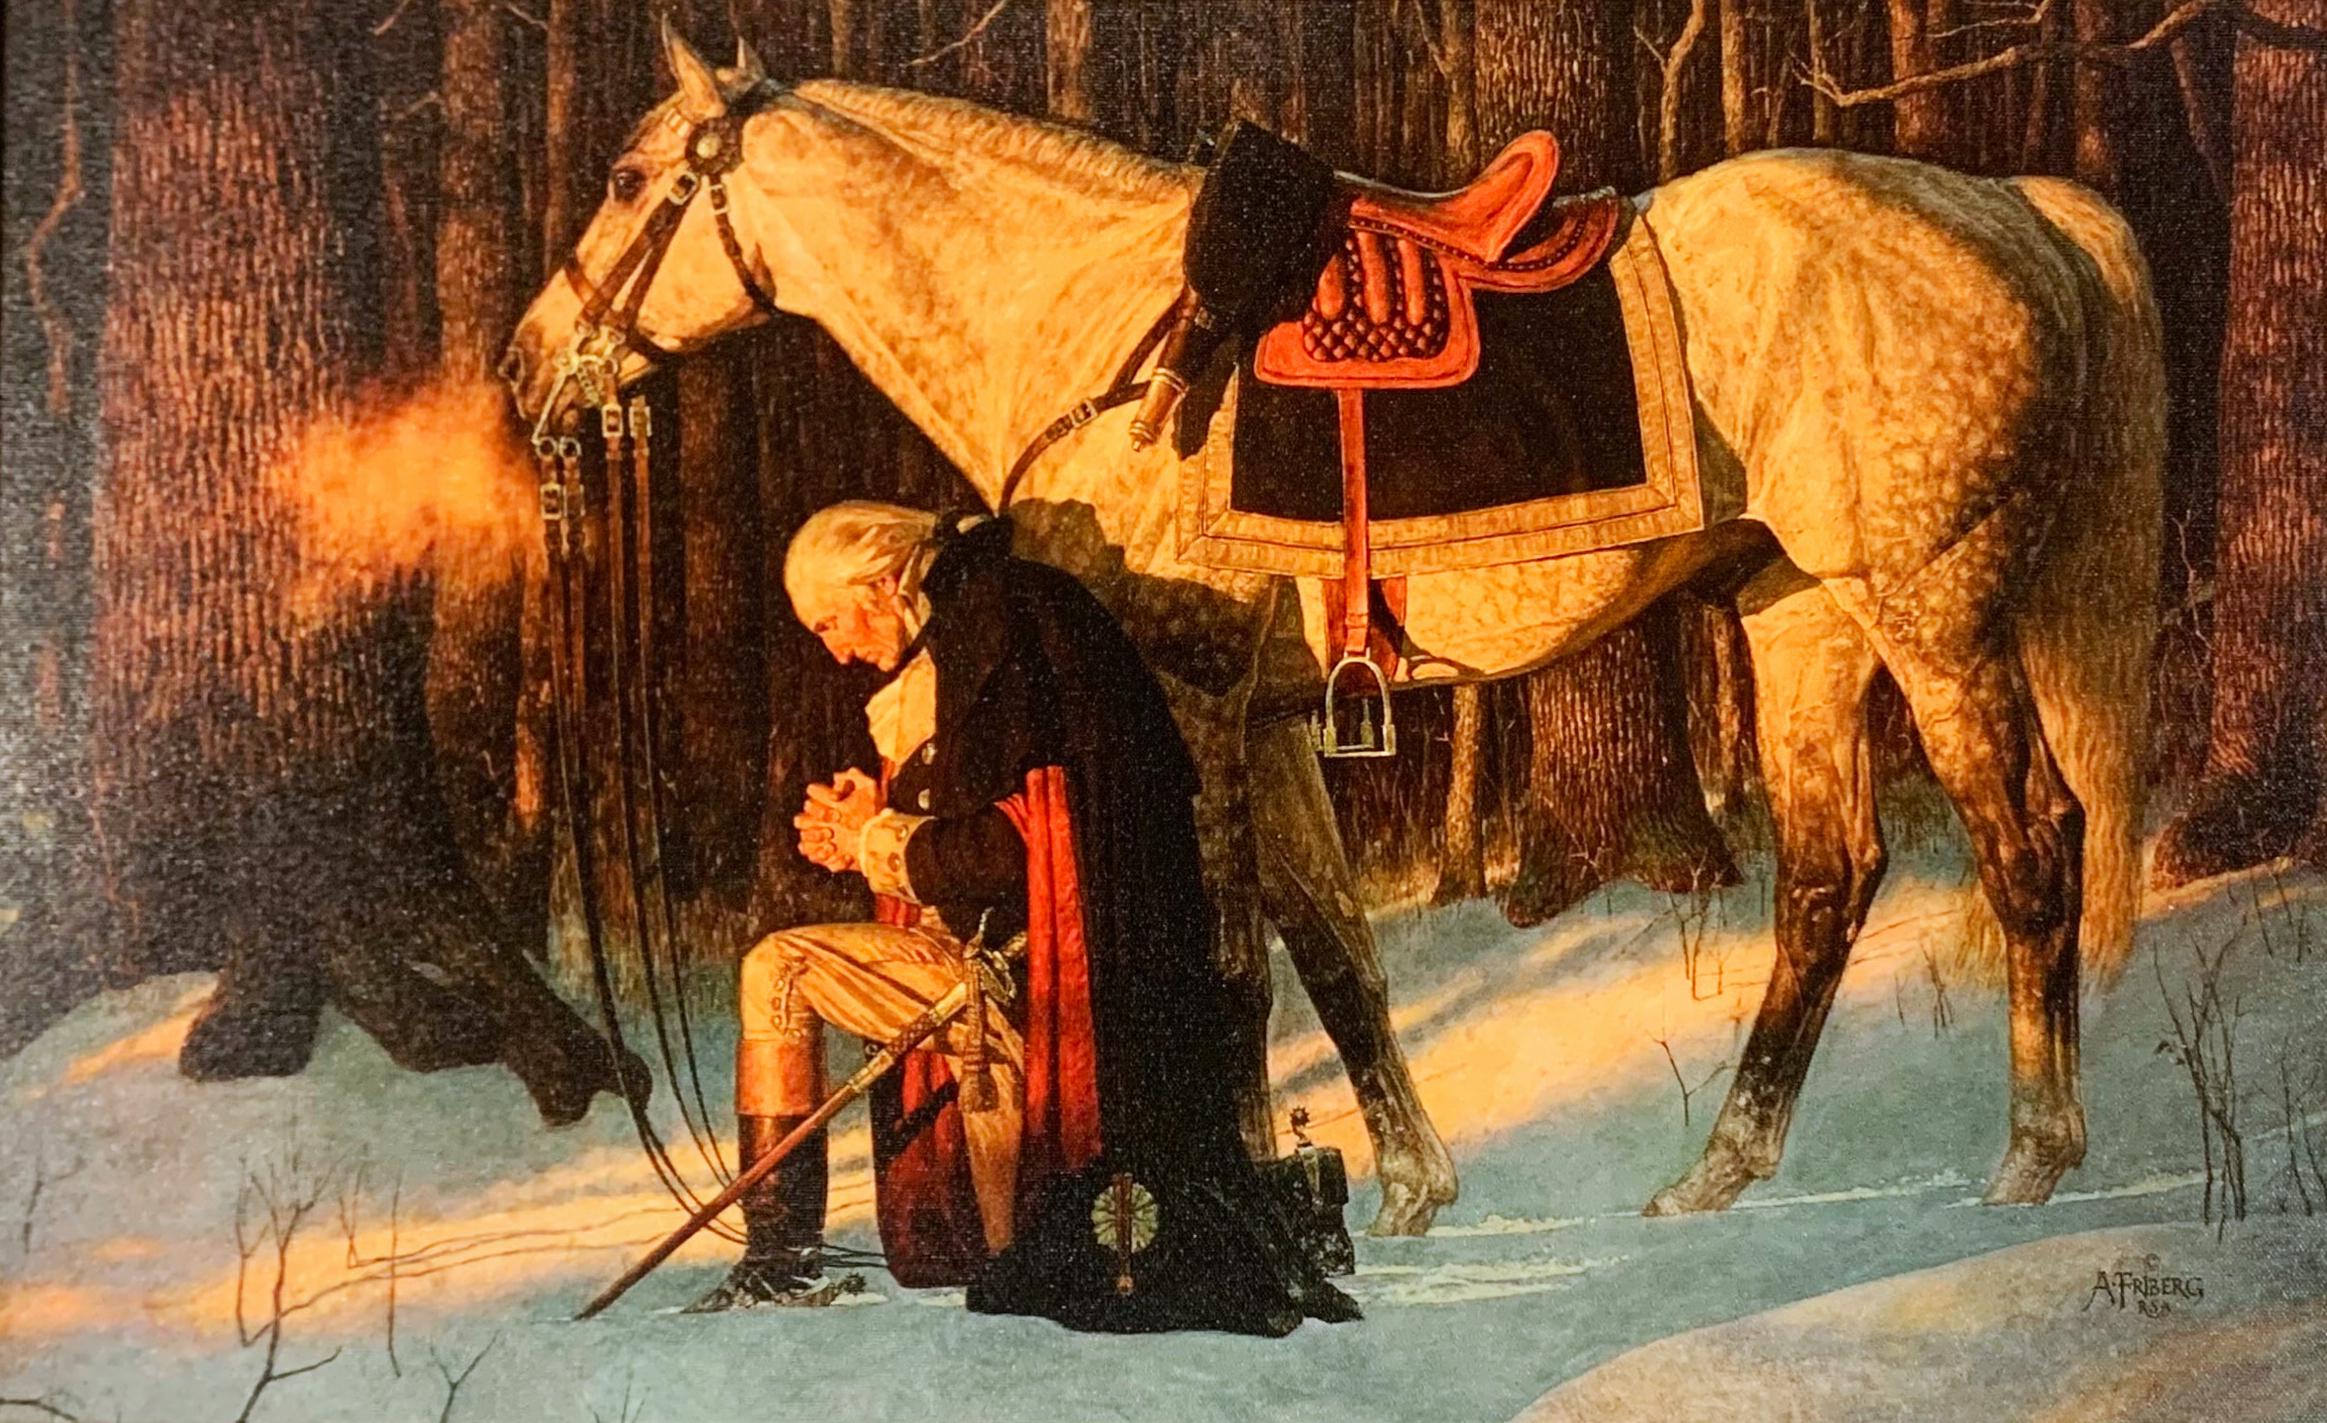 The Prayer at Valley Forge - Print by Arnold Friberg